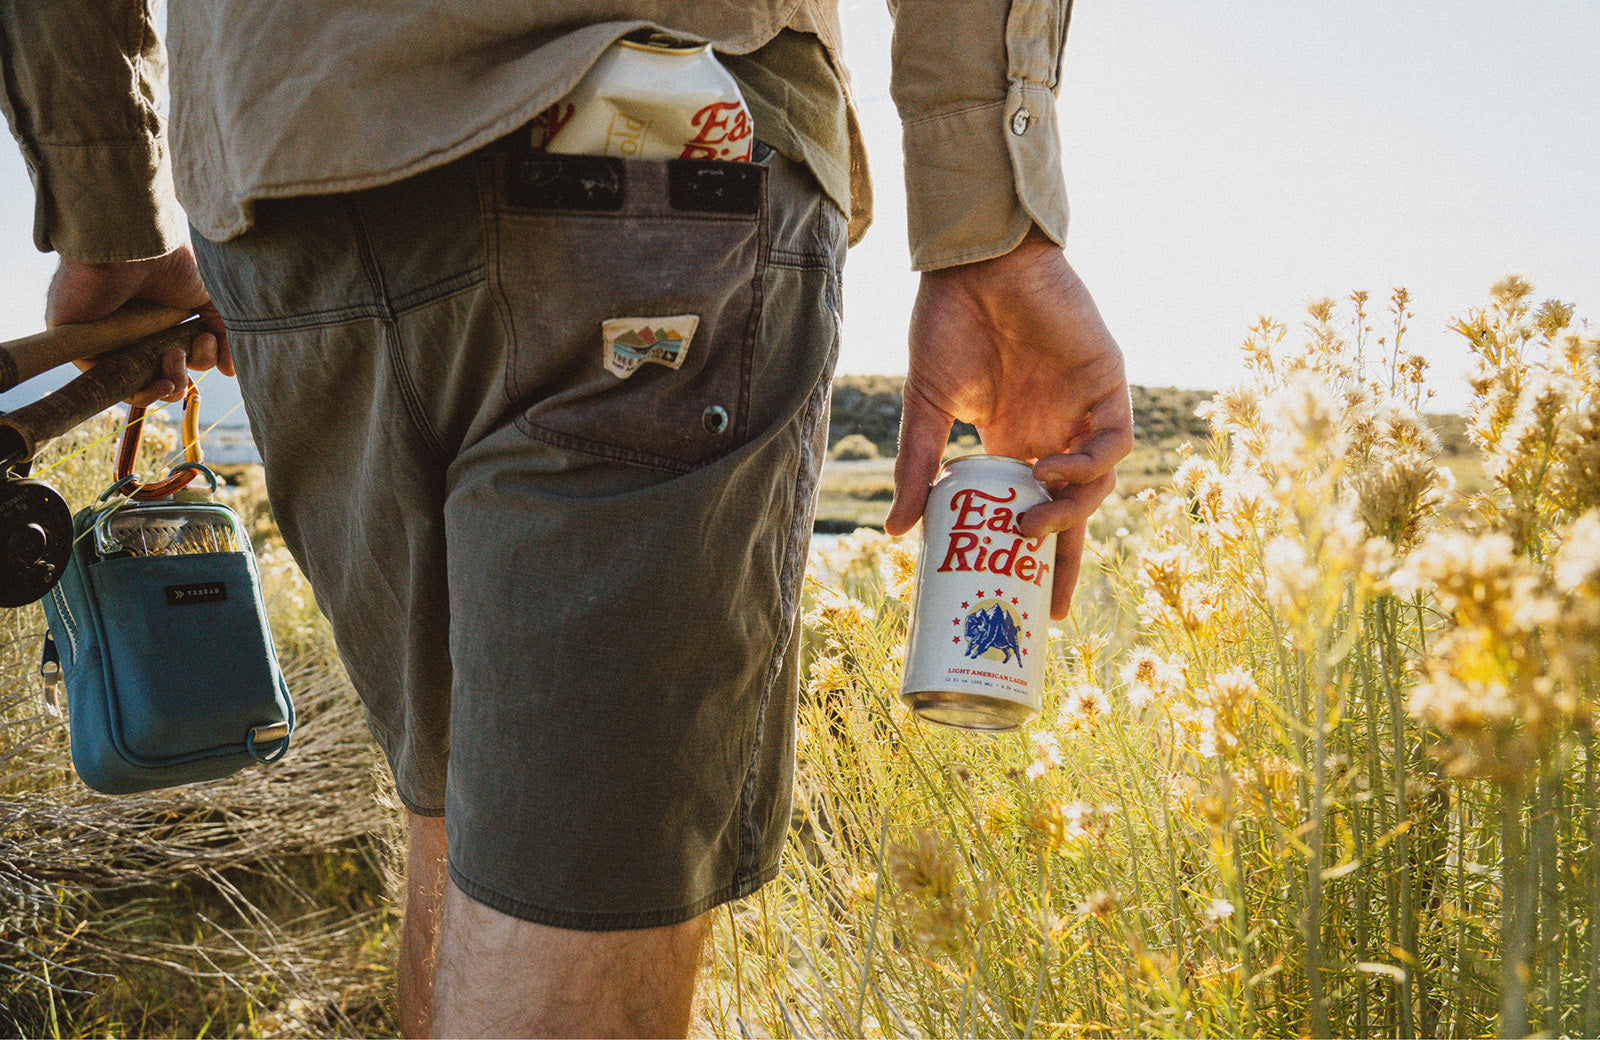 A man holding fishing gear and a can of beer walking through a field